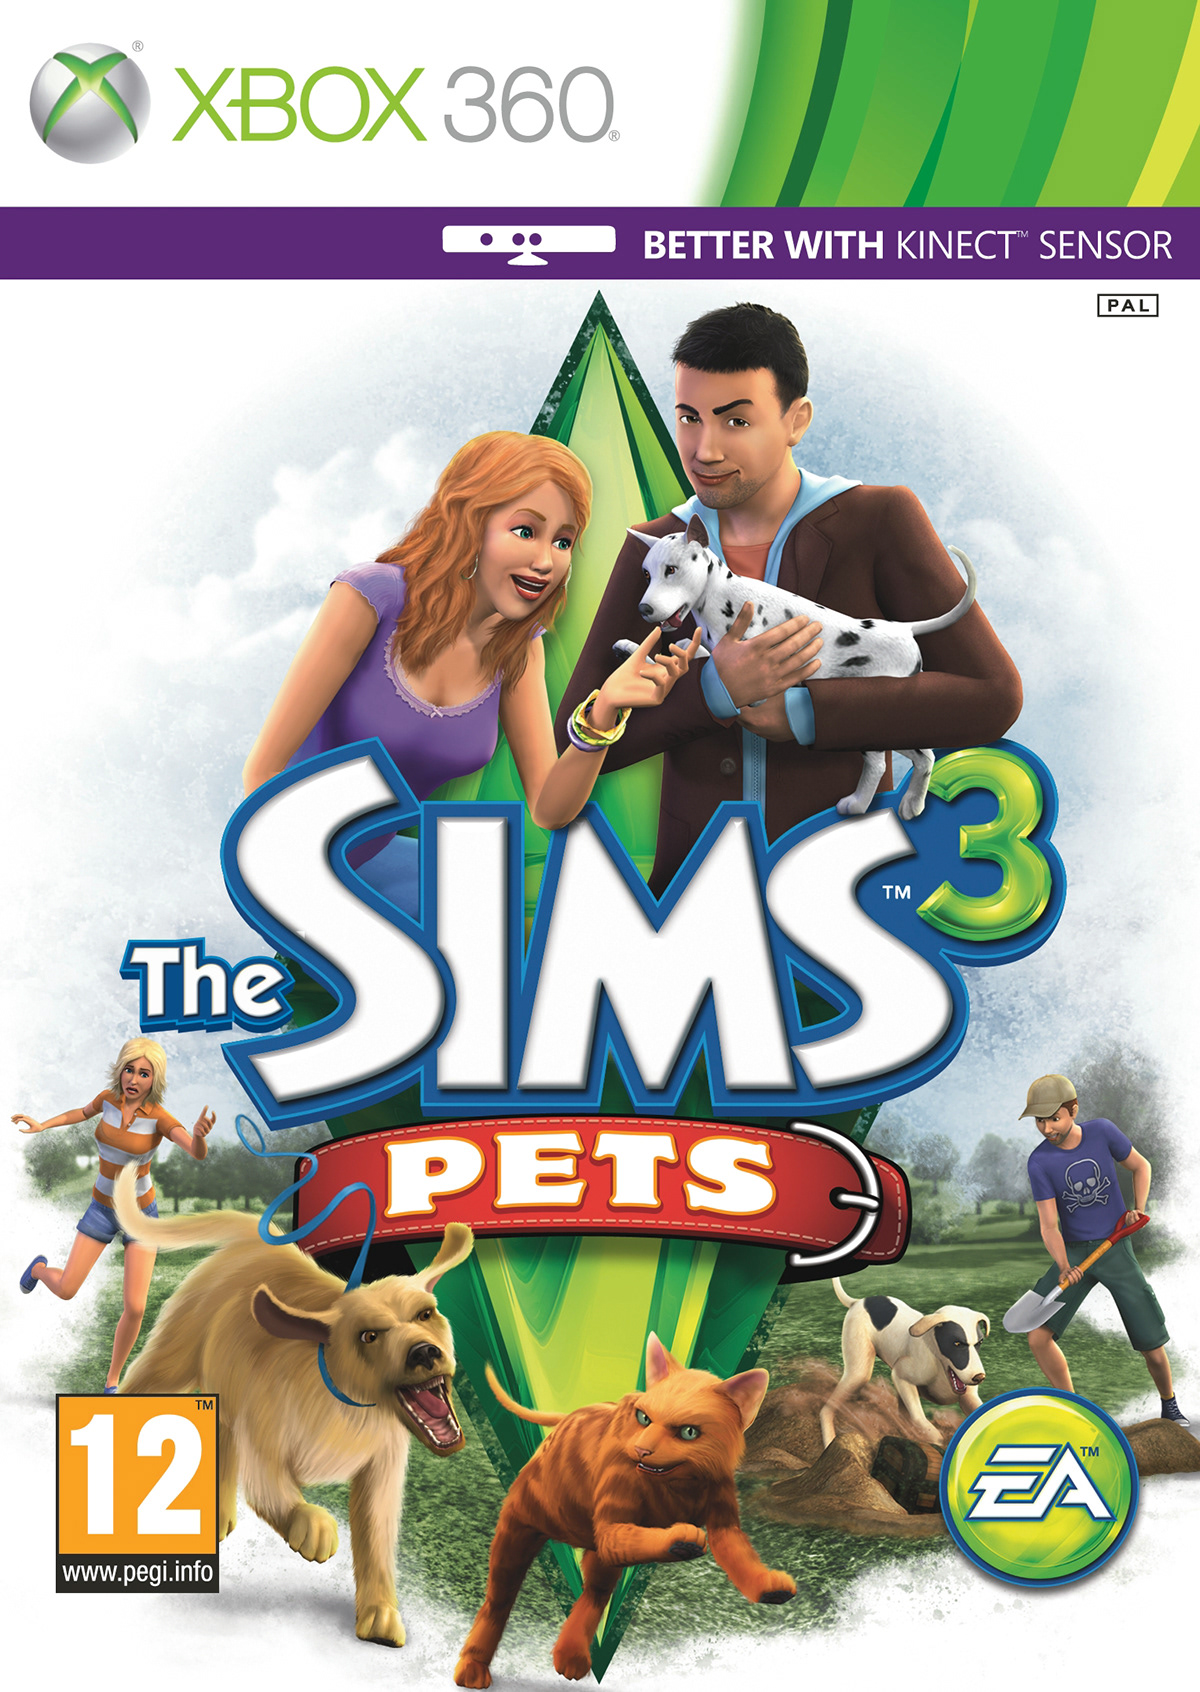 sims 3 pets Game Art